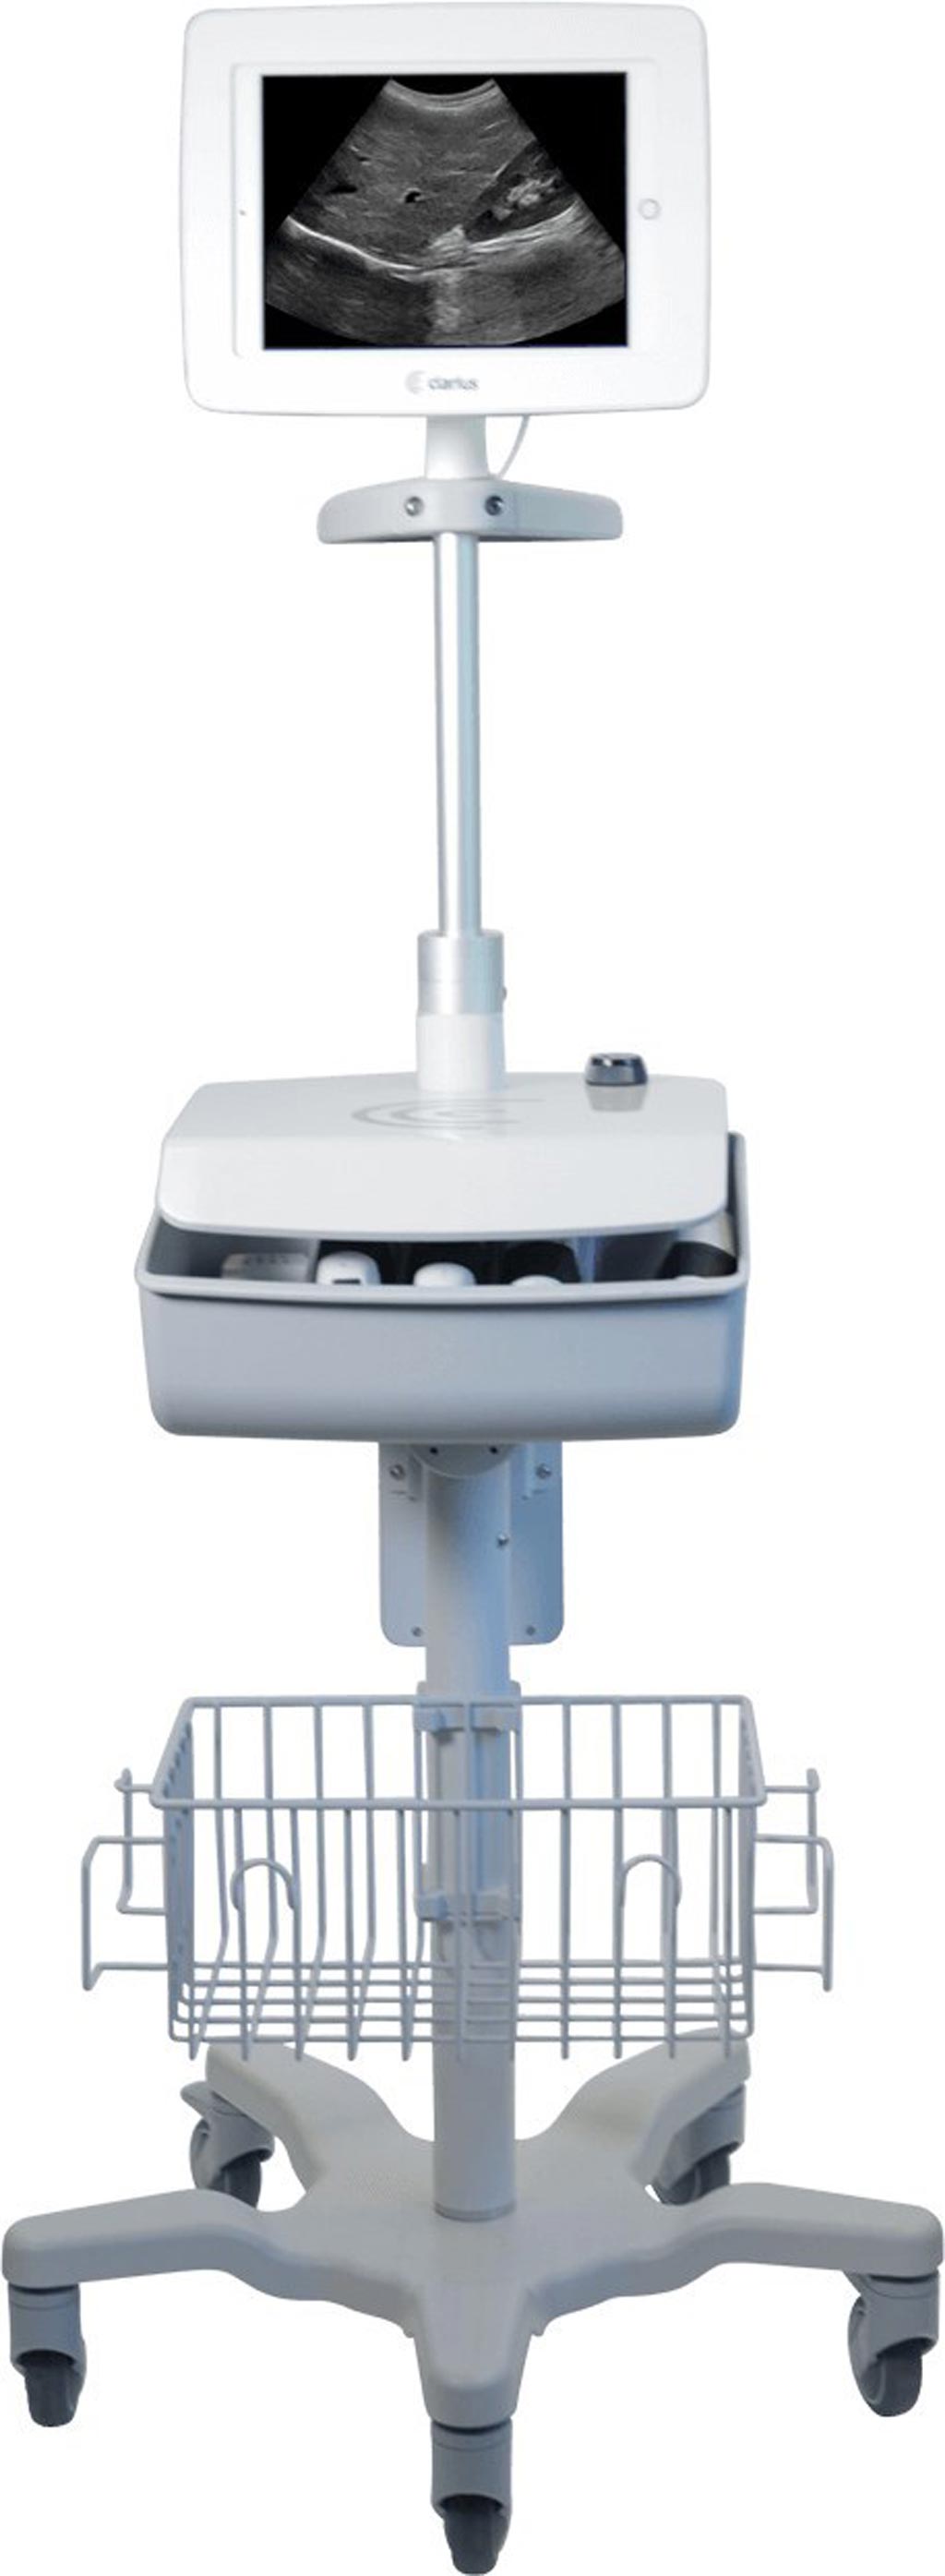 Image: A dedicated ultrasound cart holds multiple wireless scanners (Photo courtesy of Clarius).